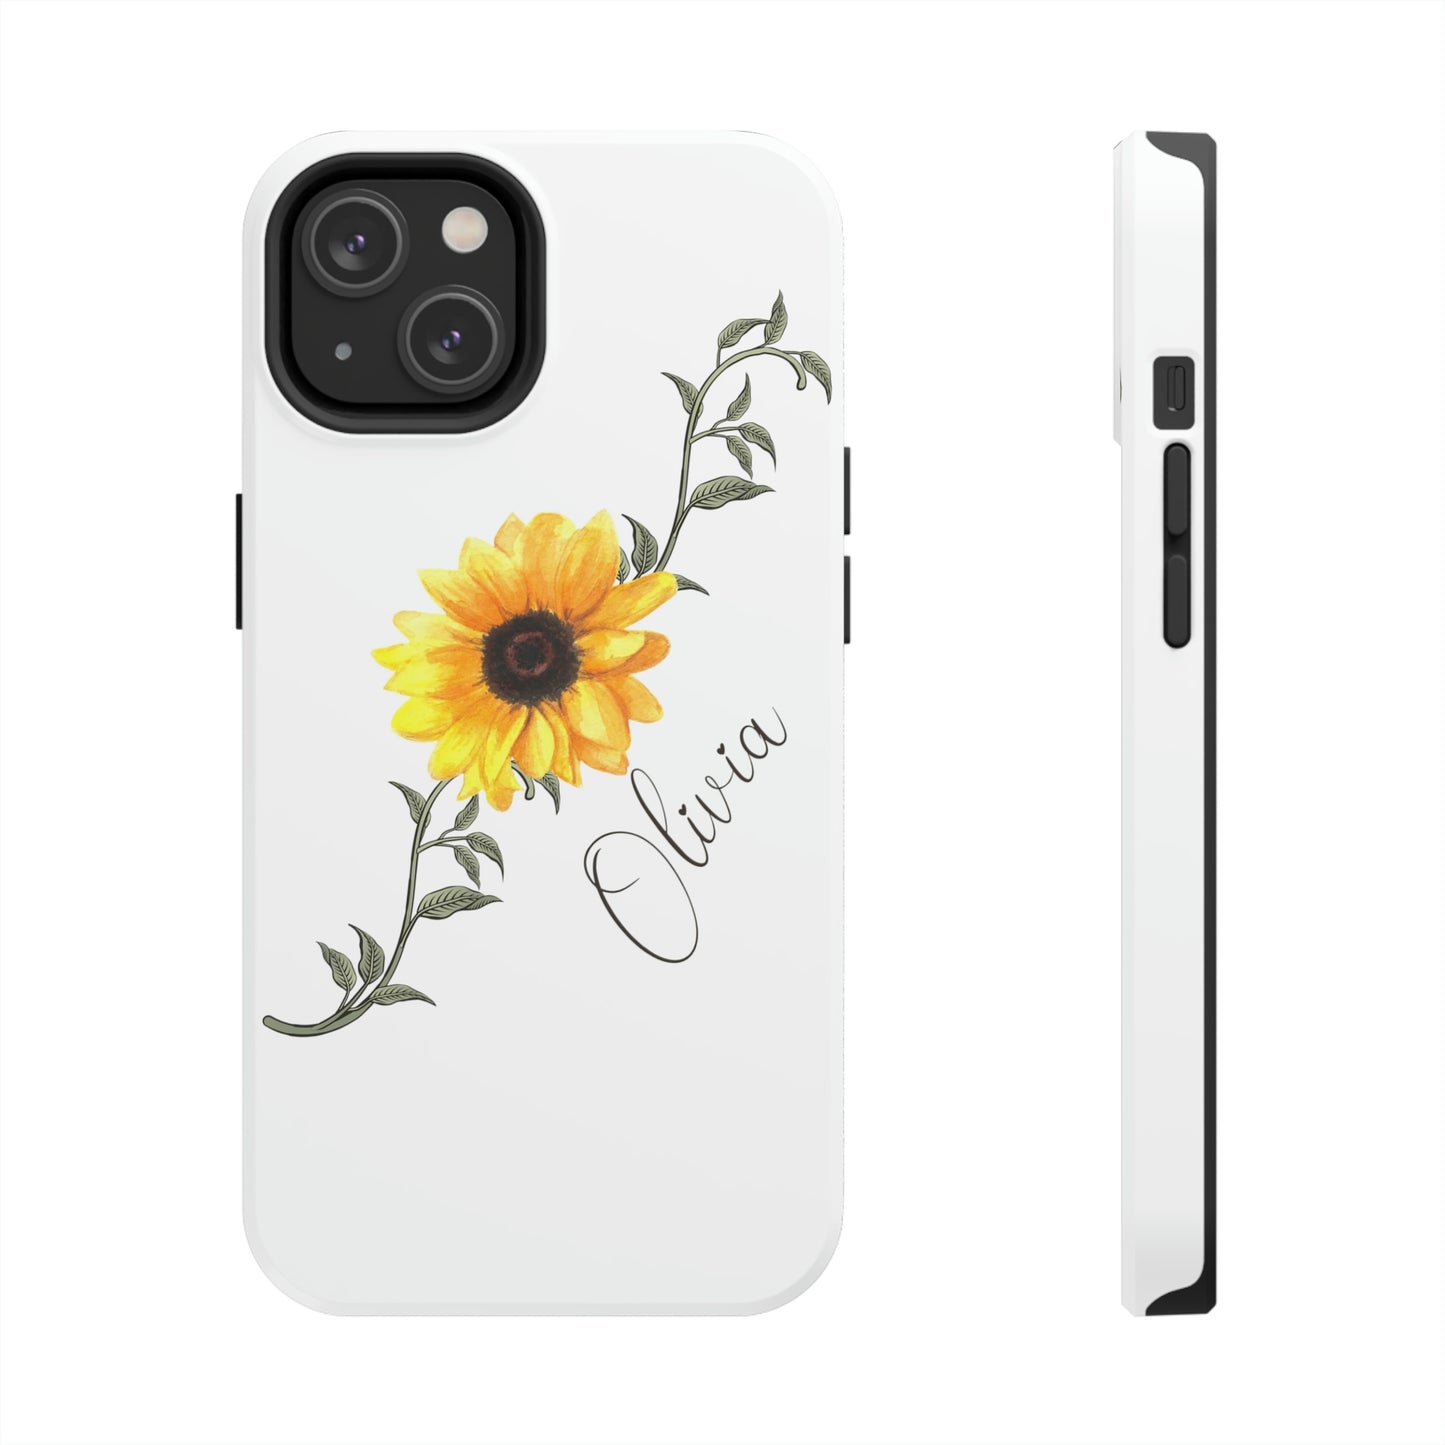 personalized sunflower iphone case for summer or spring fashion